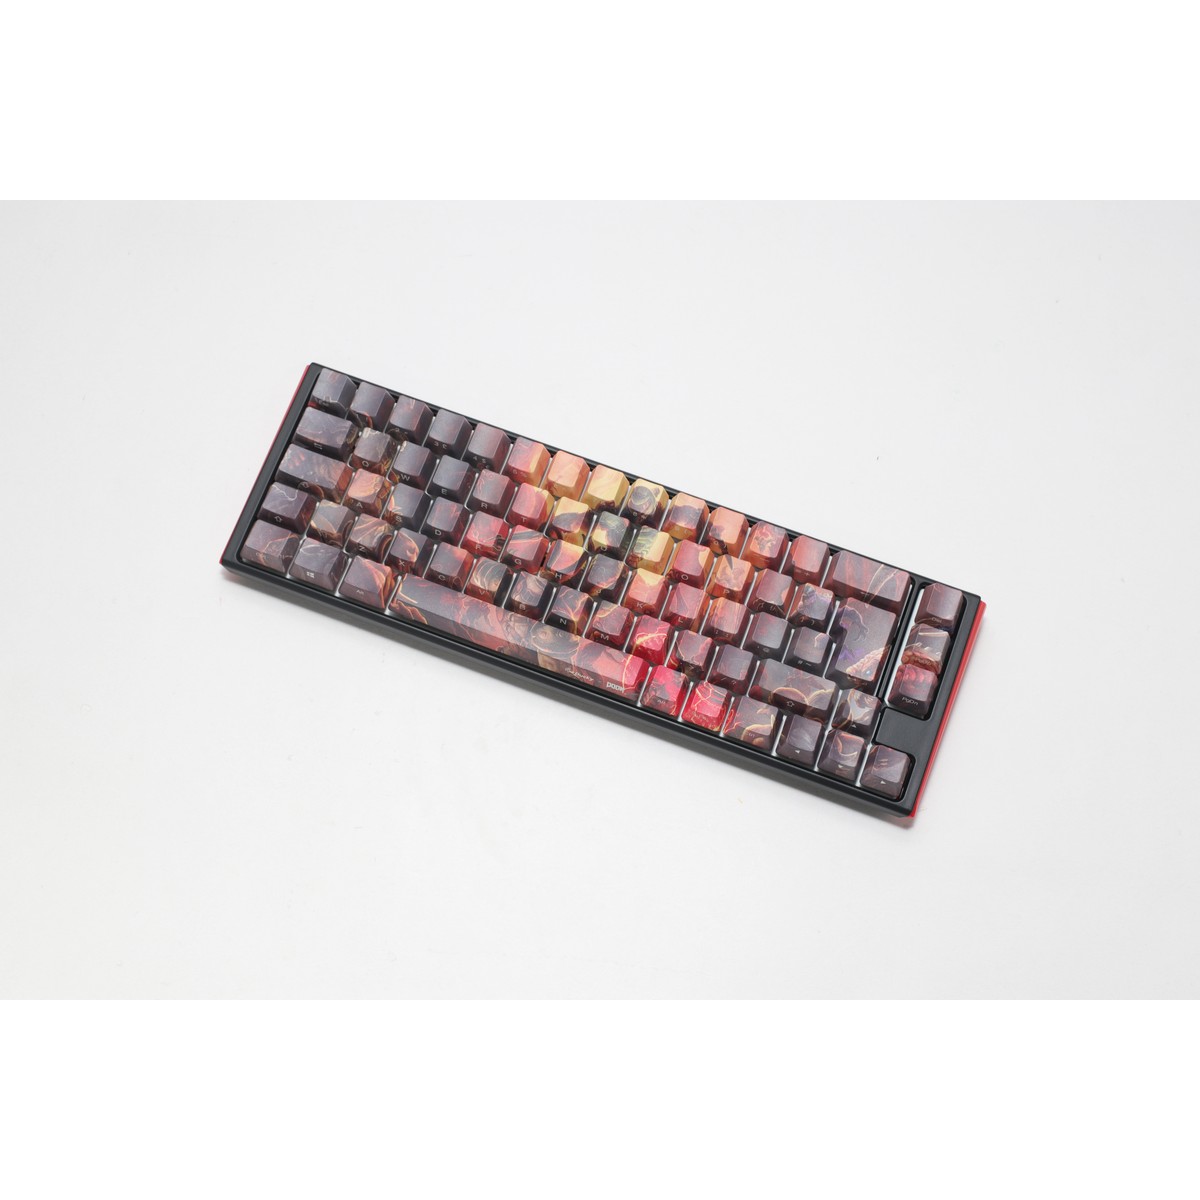 Ducky - Ducky x DOOM SF 65% Gaming Keyboard Limited Edition Cherry MX Brown Switches UK